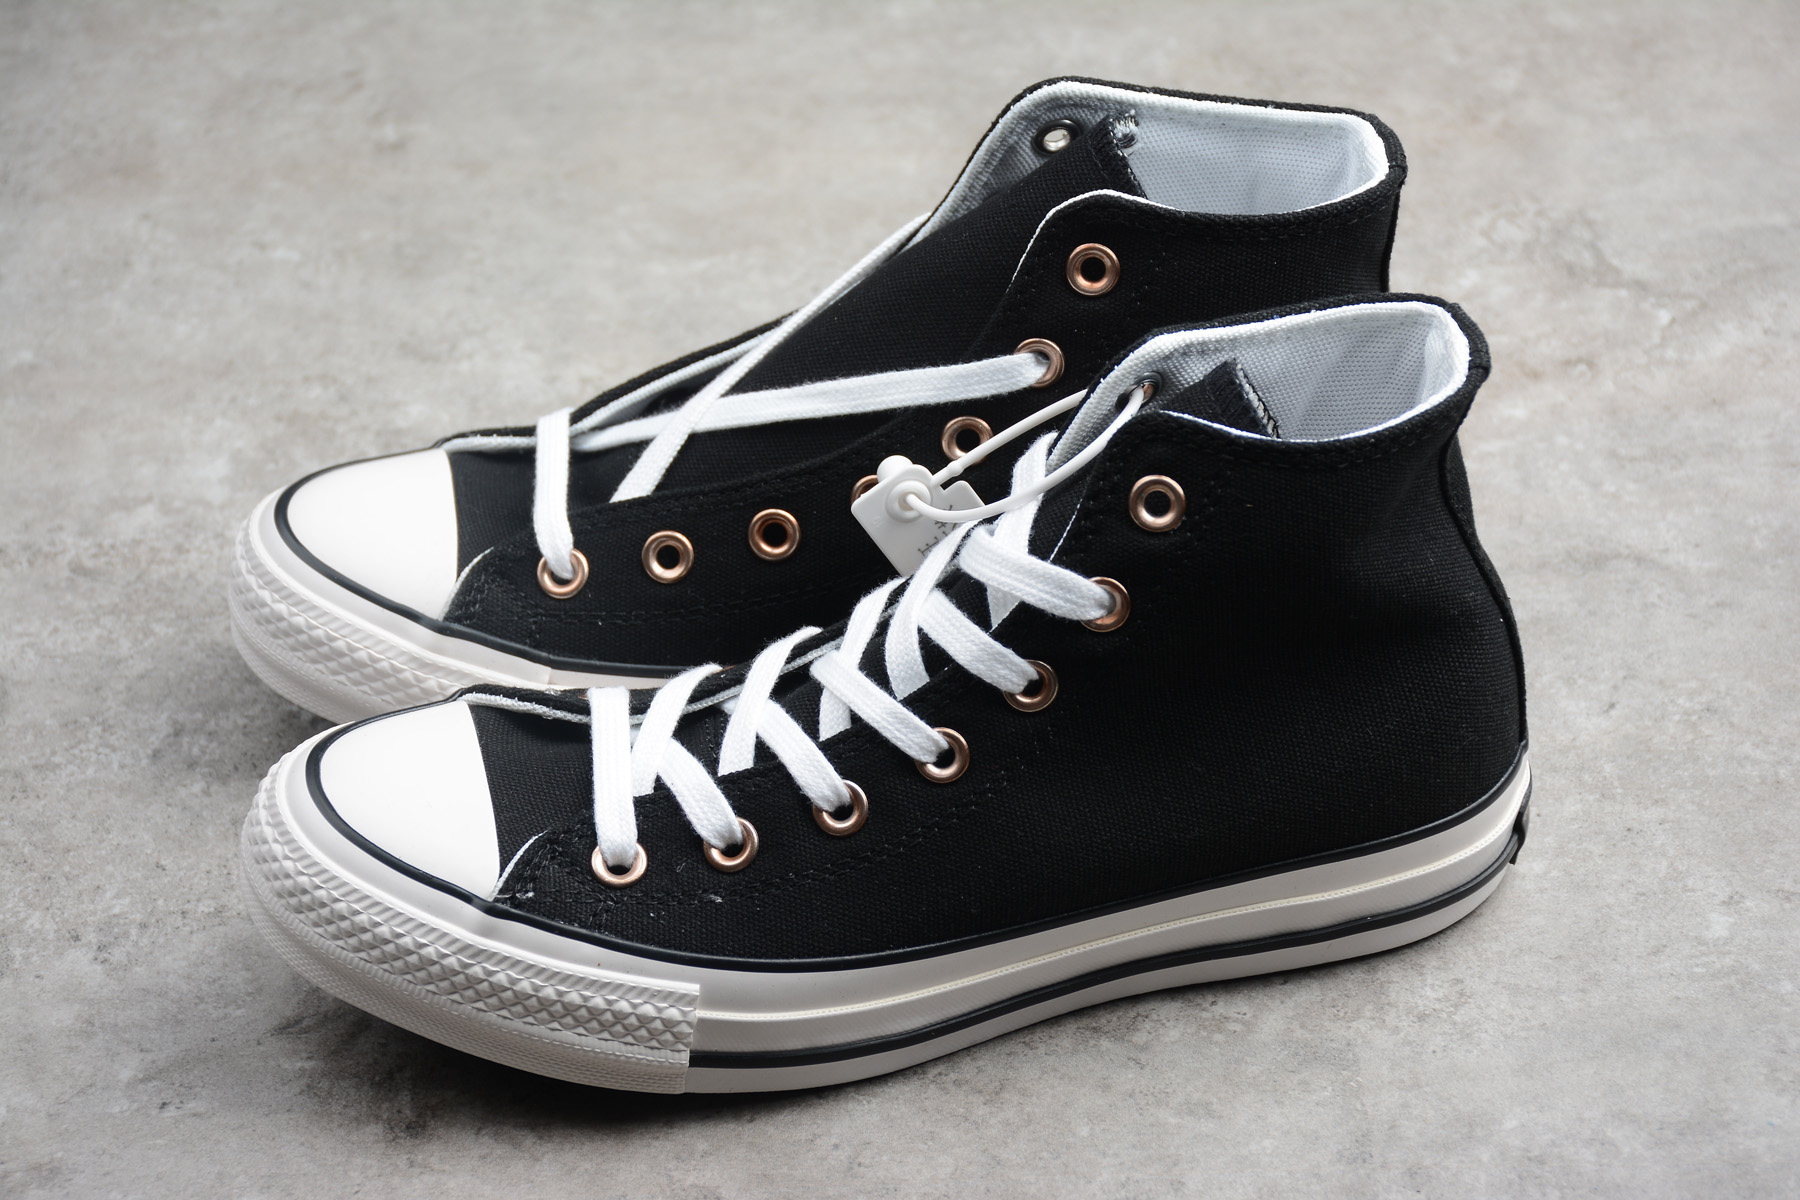 Converse All Star 100 Colors HI Black/White 5CK933 Free Shipping